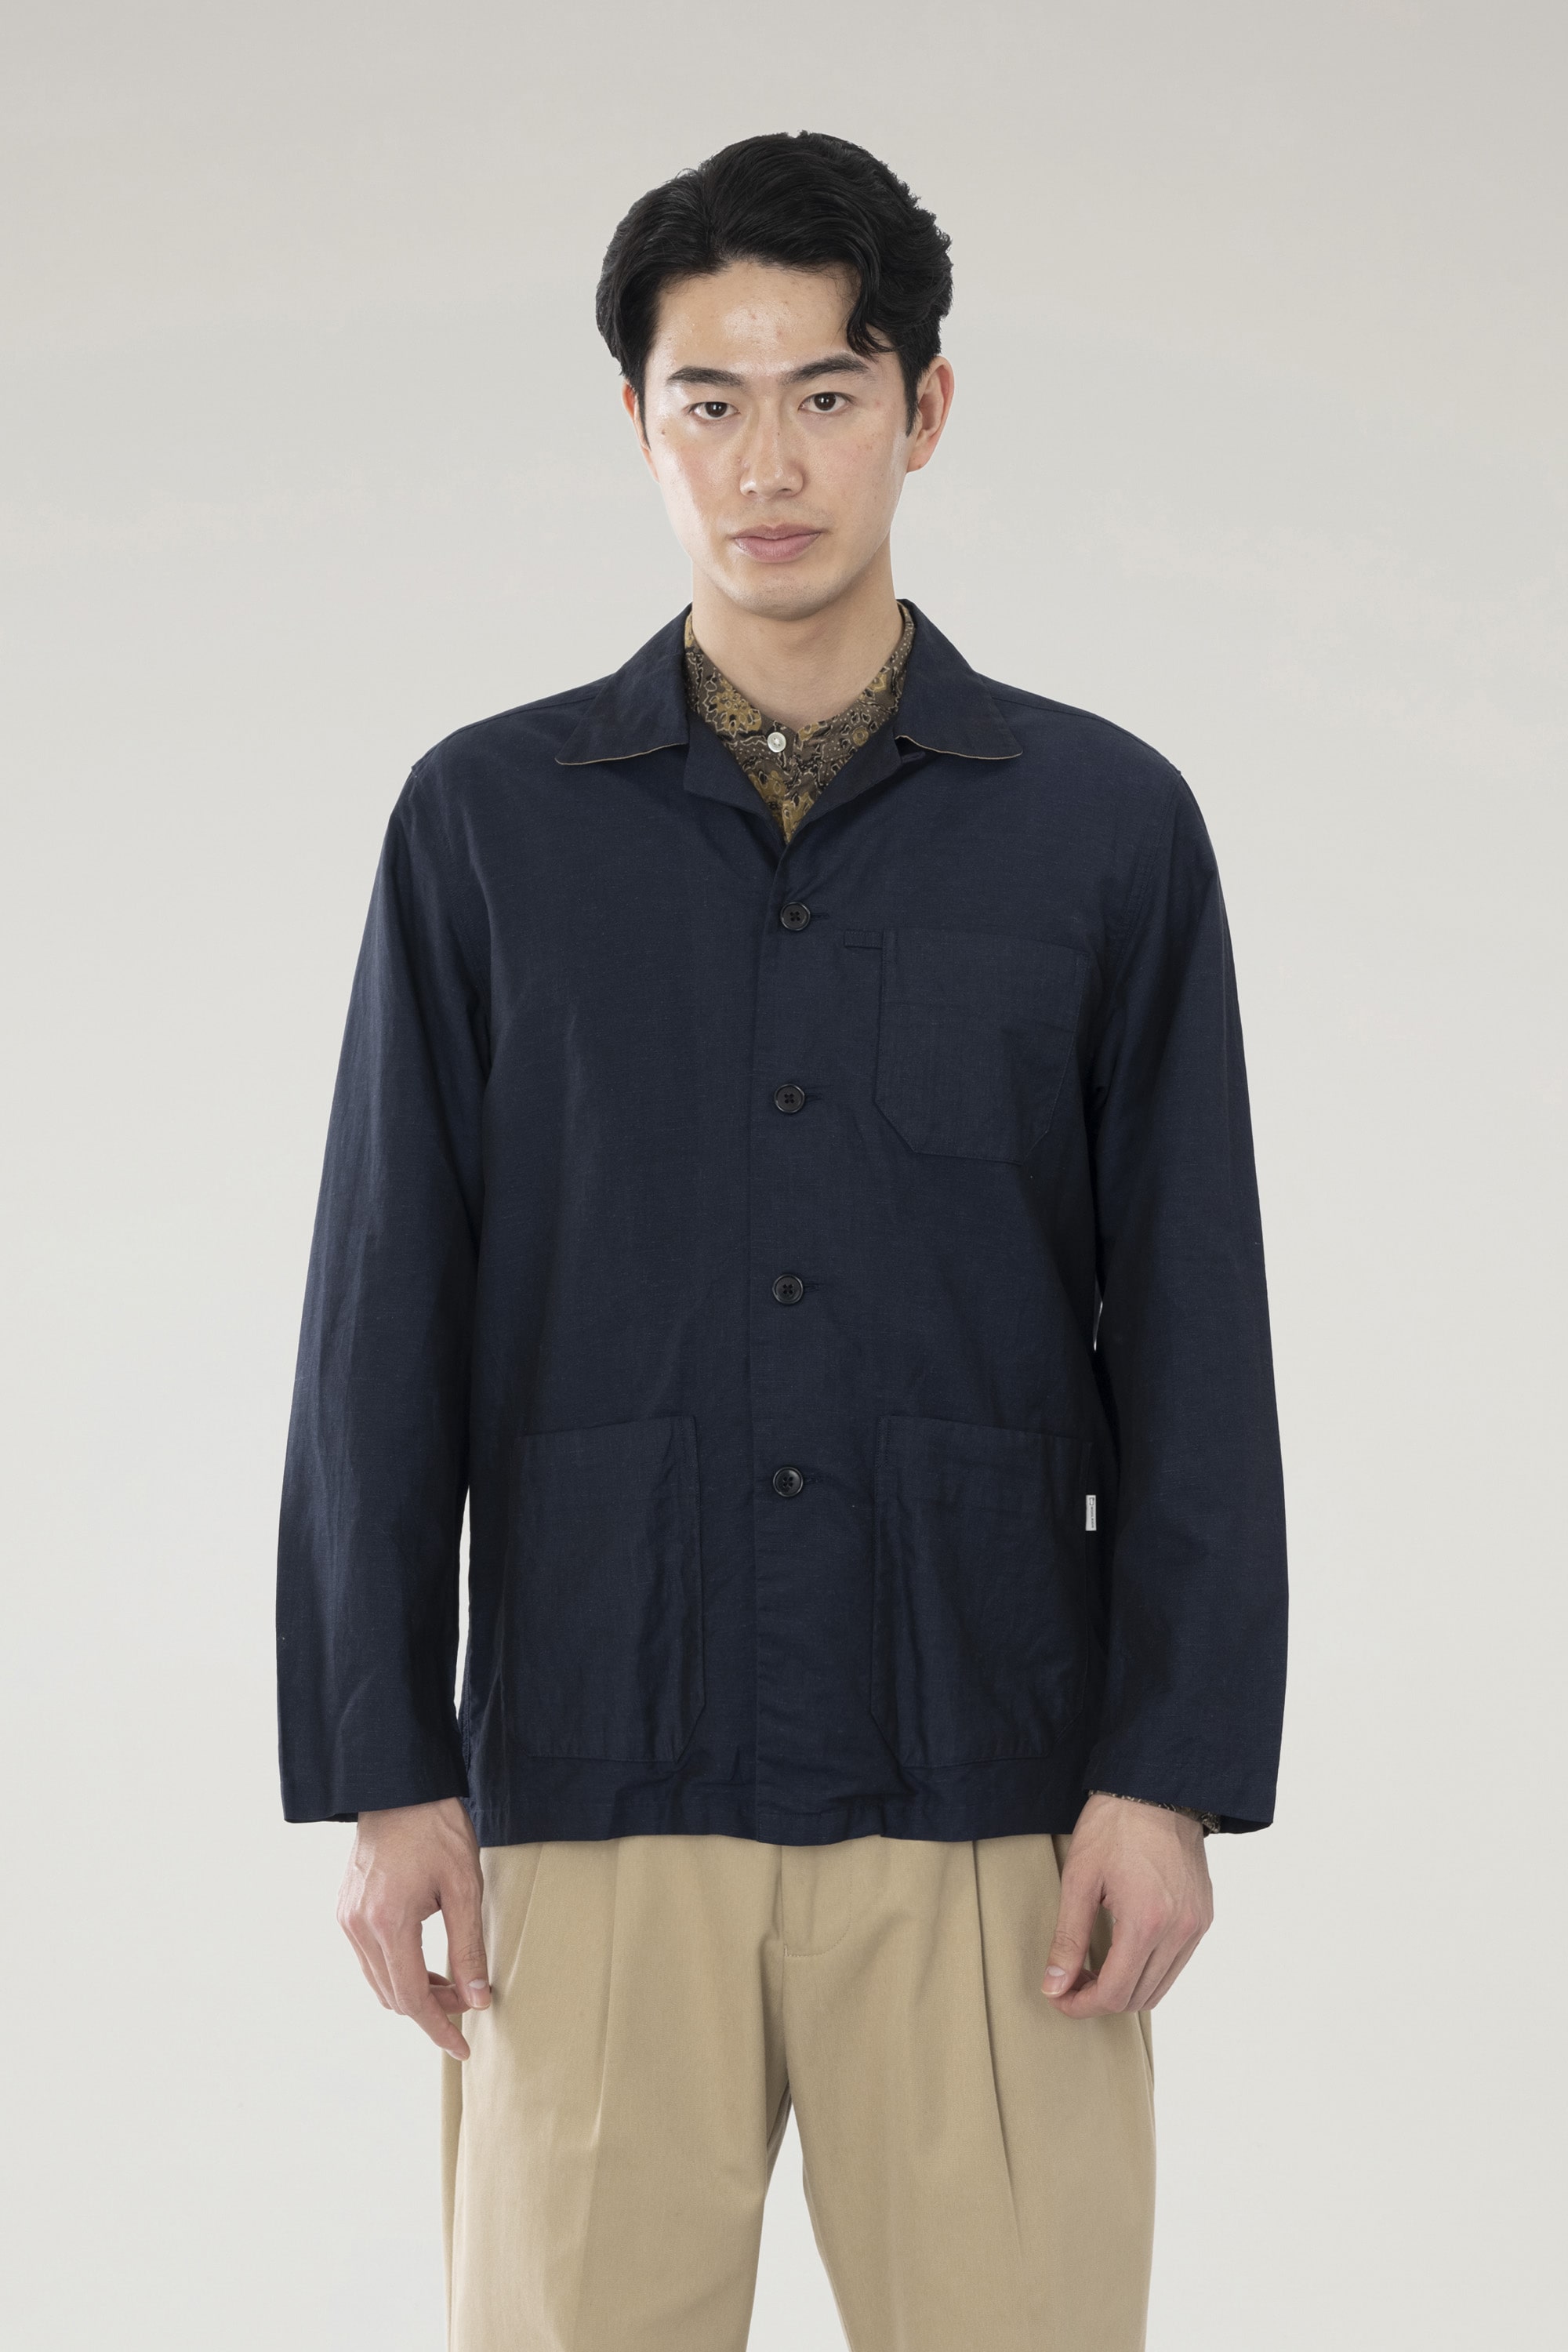 AUTHENTIC COLLECTION｜商品一覧｜WOOLRICH（ウールリッチ）公式 